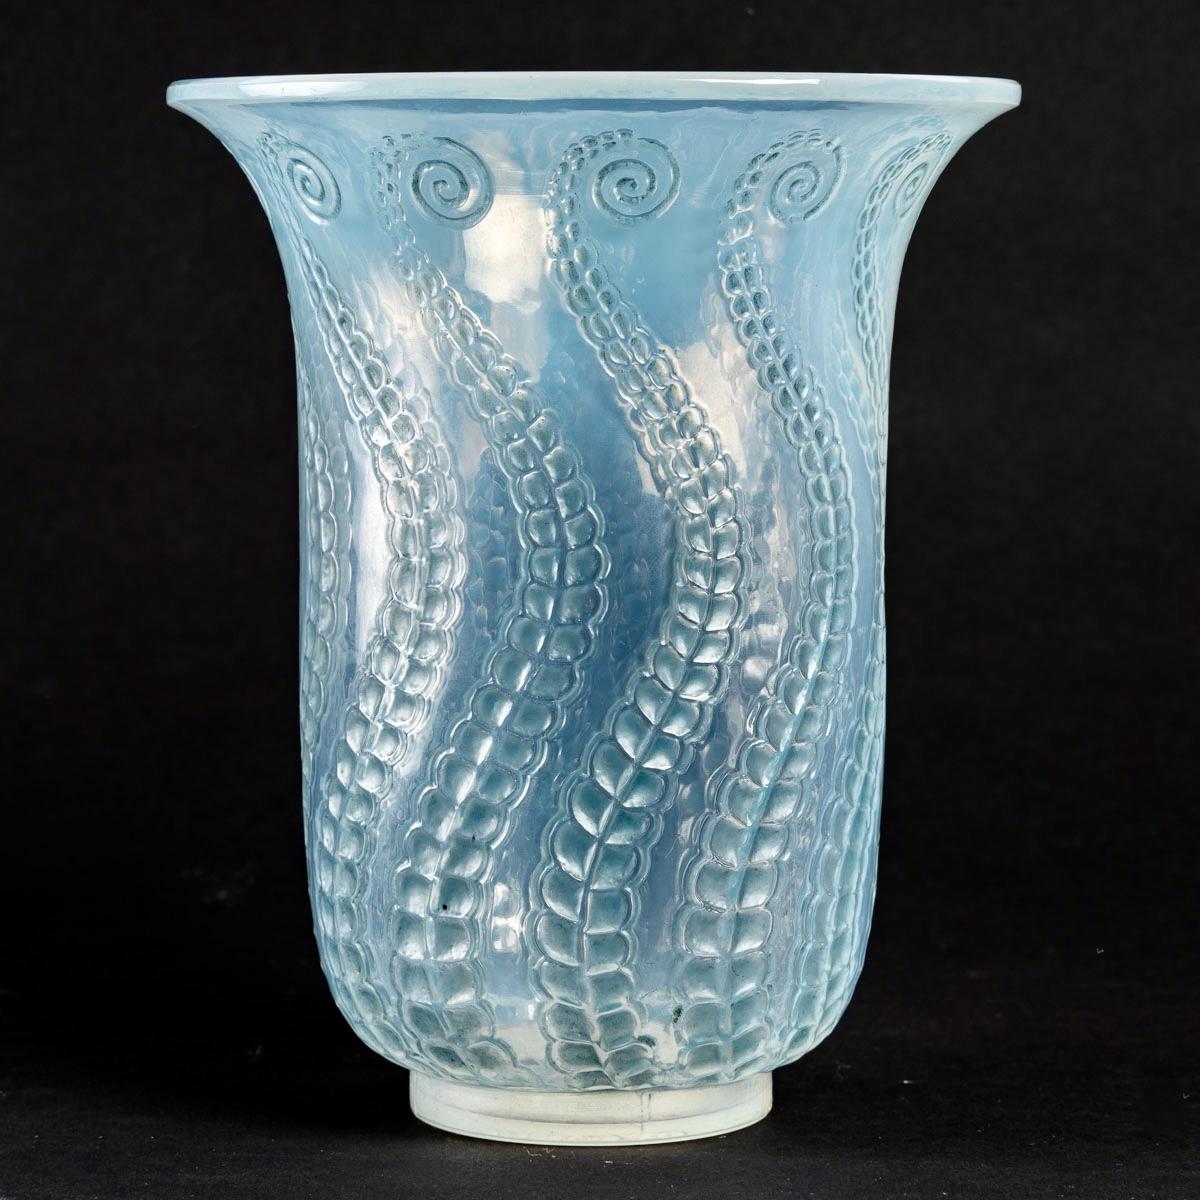 French 1921 René Lalique Meduse Vase in Opalescent Glass with Blue Patina, Medusa